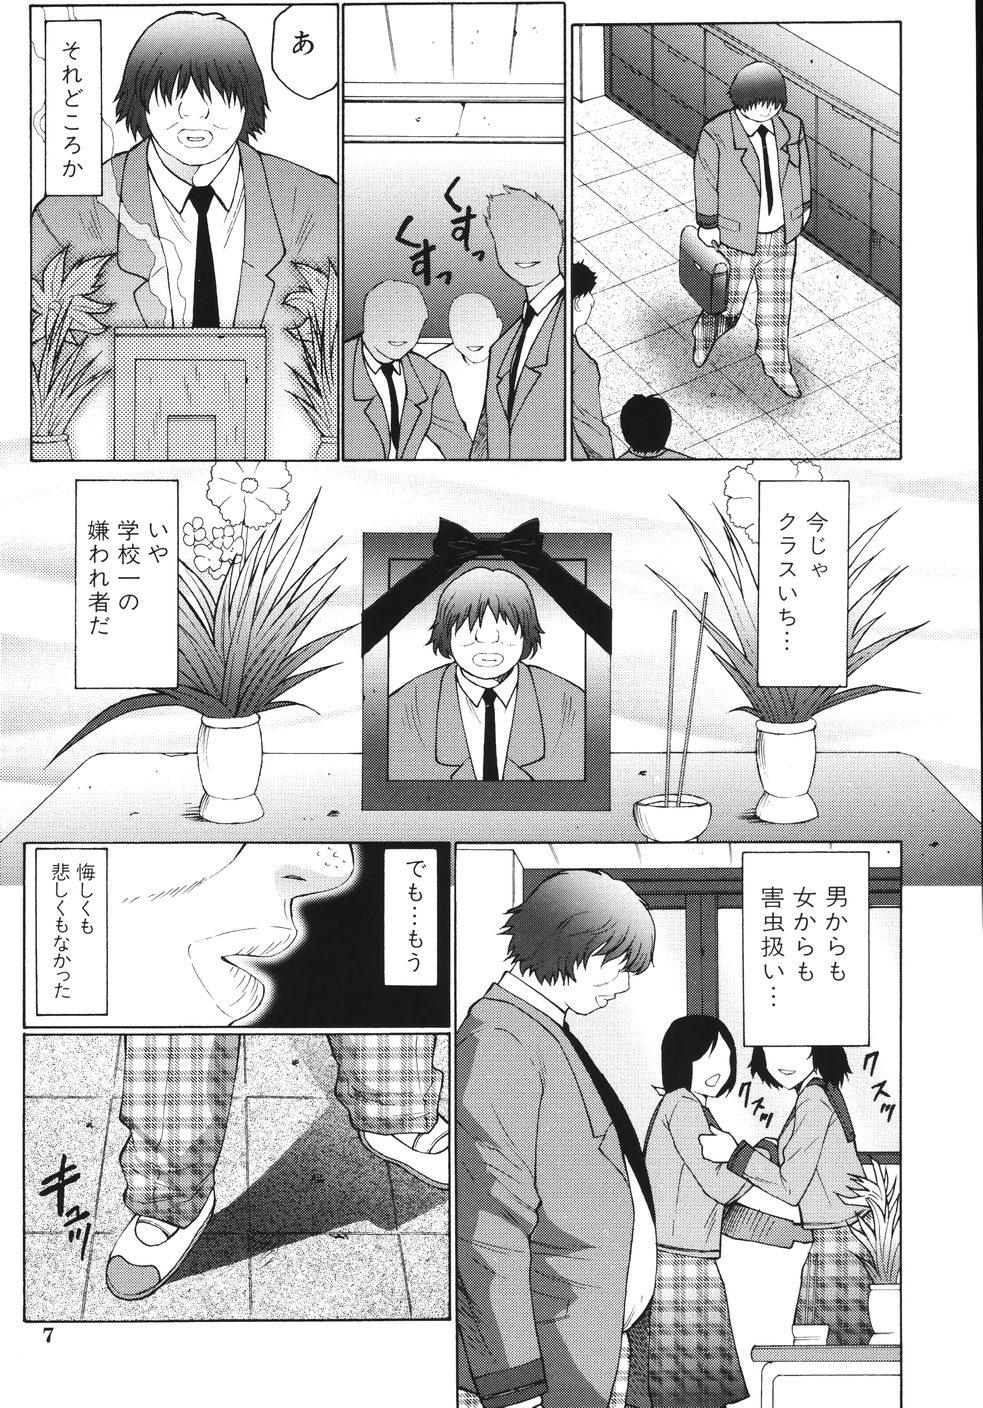 Chacal M Haha Musume Choukyou Nikki Sperm - Page 11